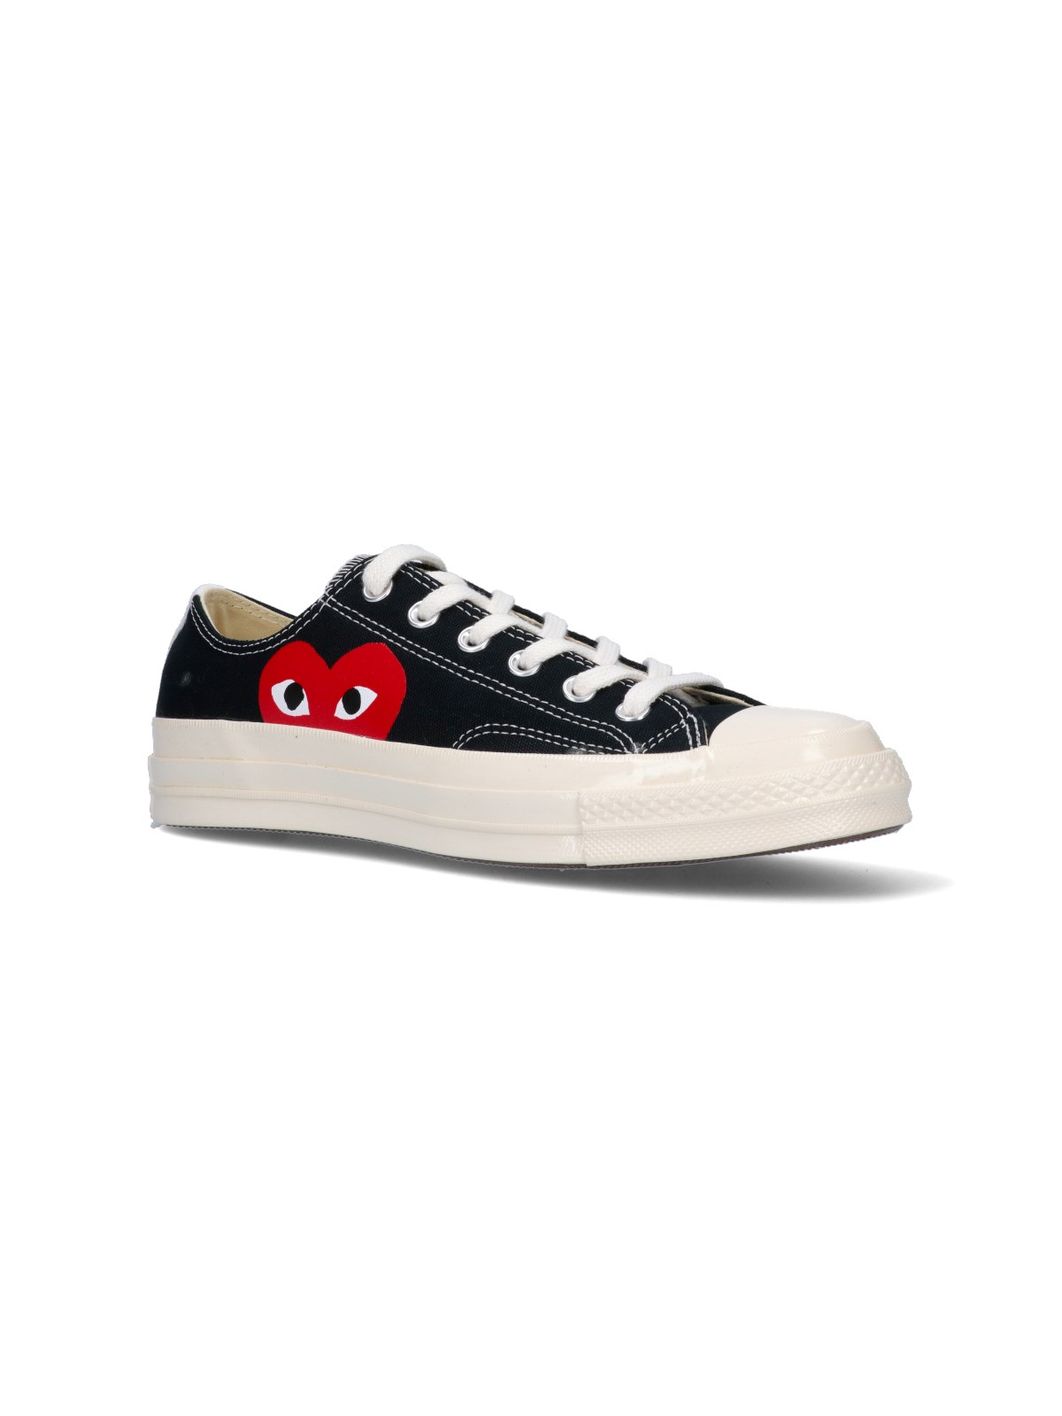 Comme Des Garcons Play "Converse Chuck 70" Low Top Sneakers